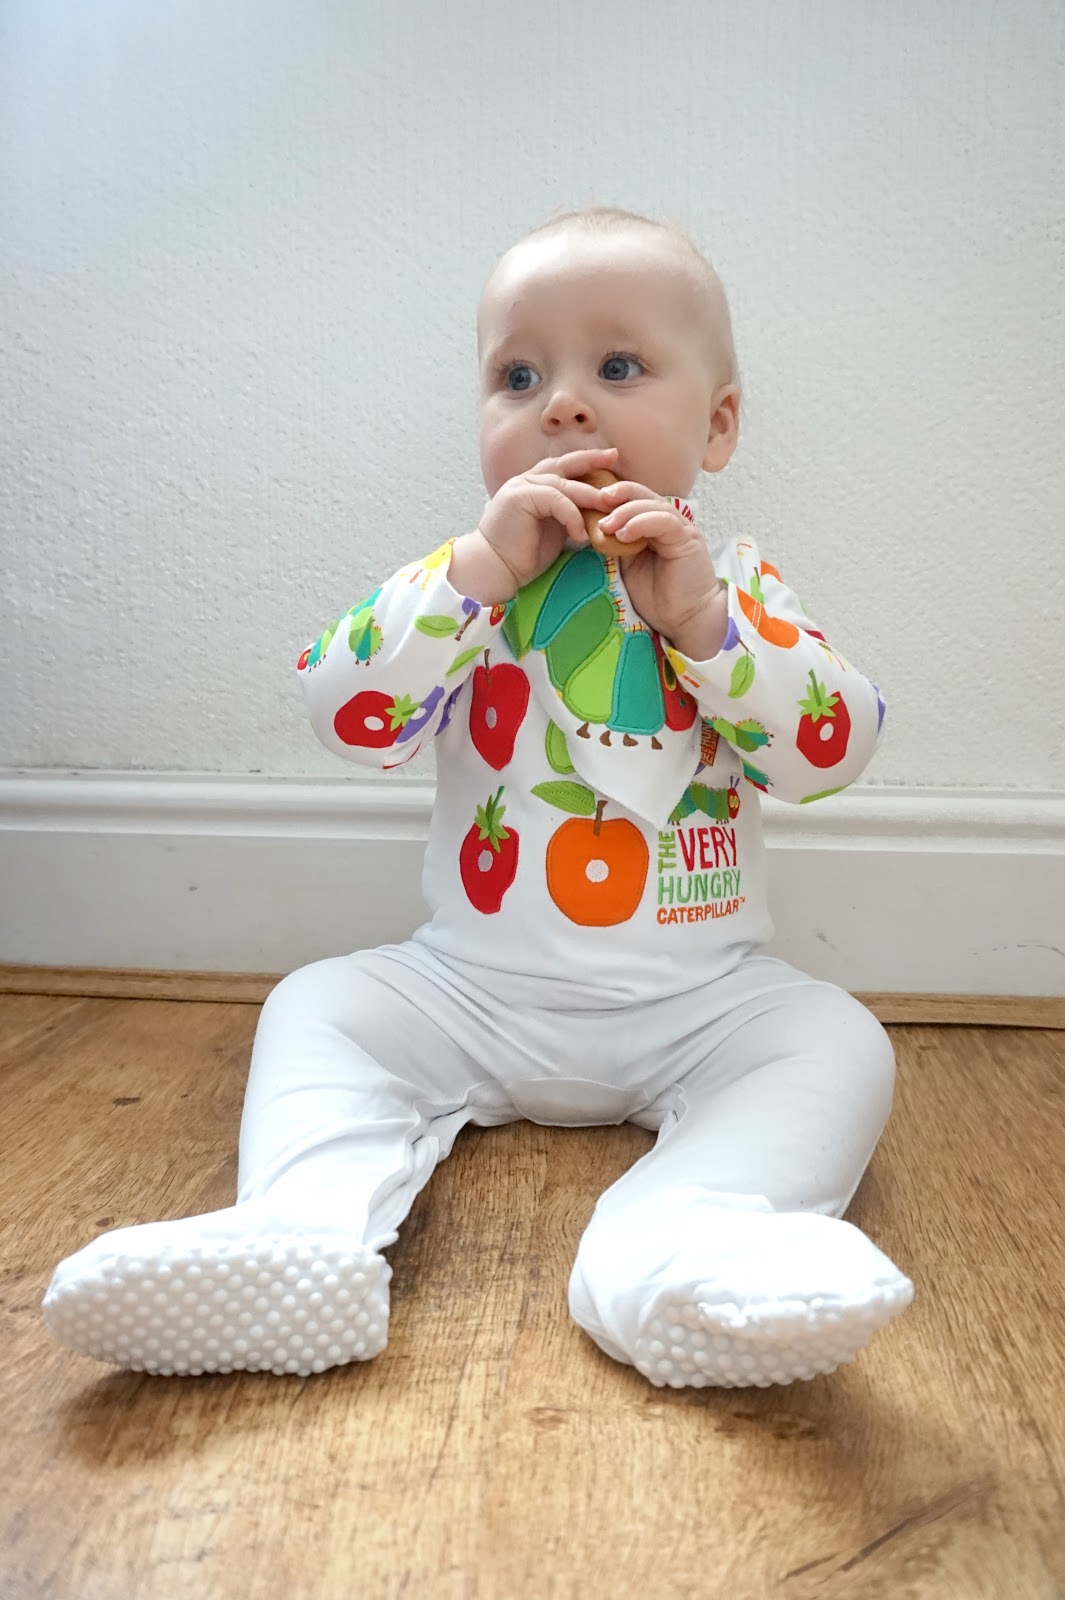 The Very Hungry Caterpillar Clothing From TU Sainsbury's | Beth Owen